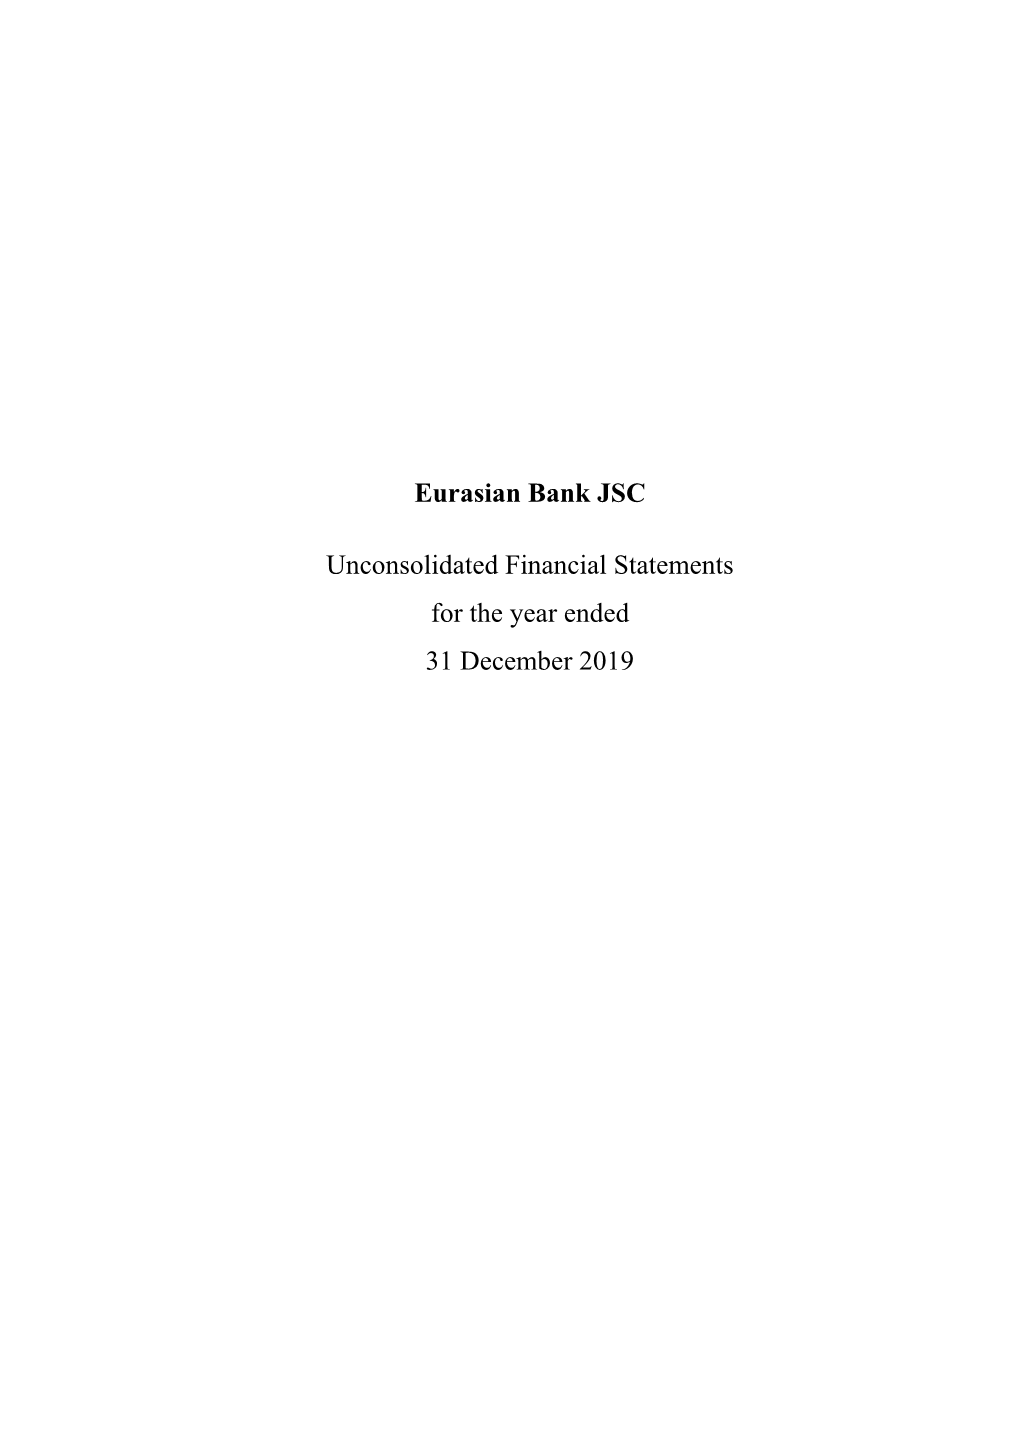 Eurasian Bank JSC Unconsolidated Financial Statements for The